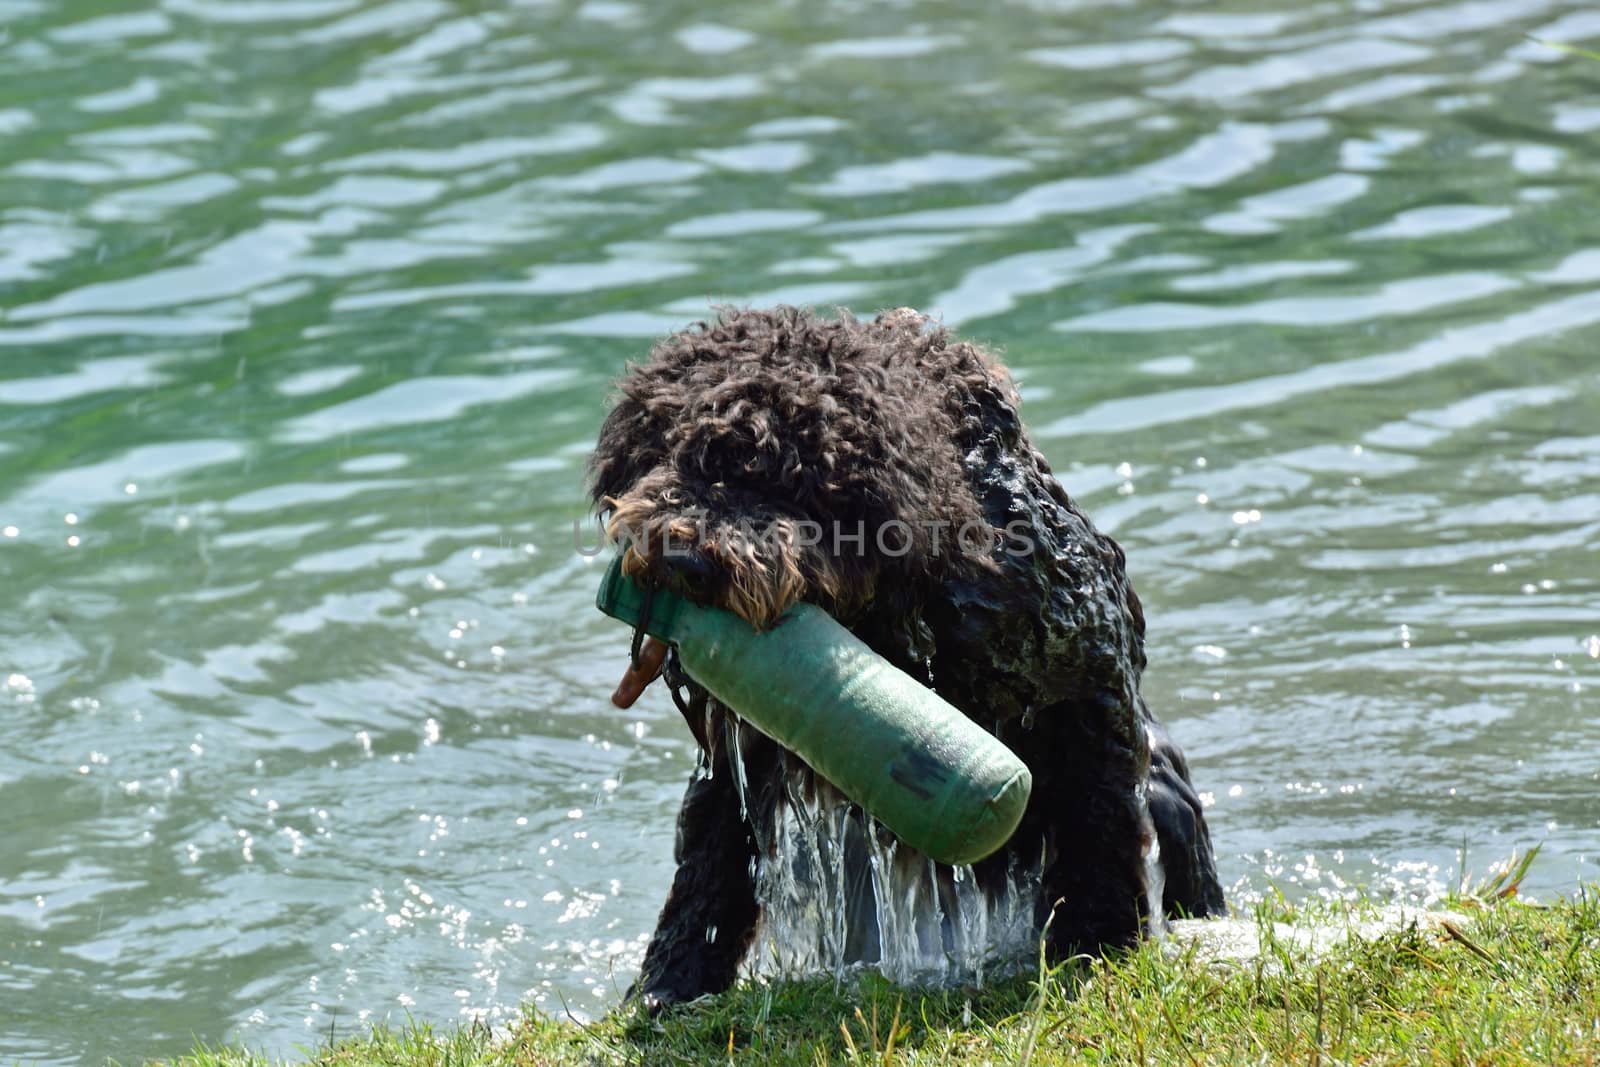 Dog fetching toy from lake